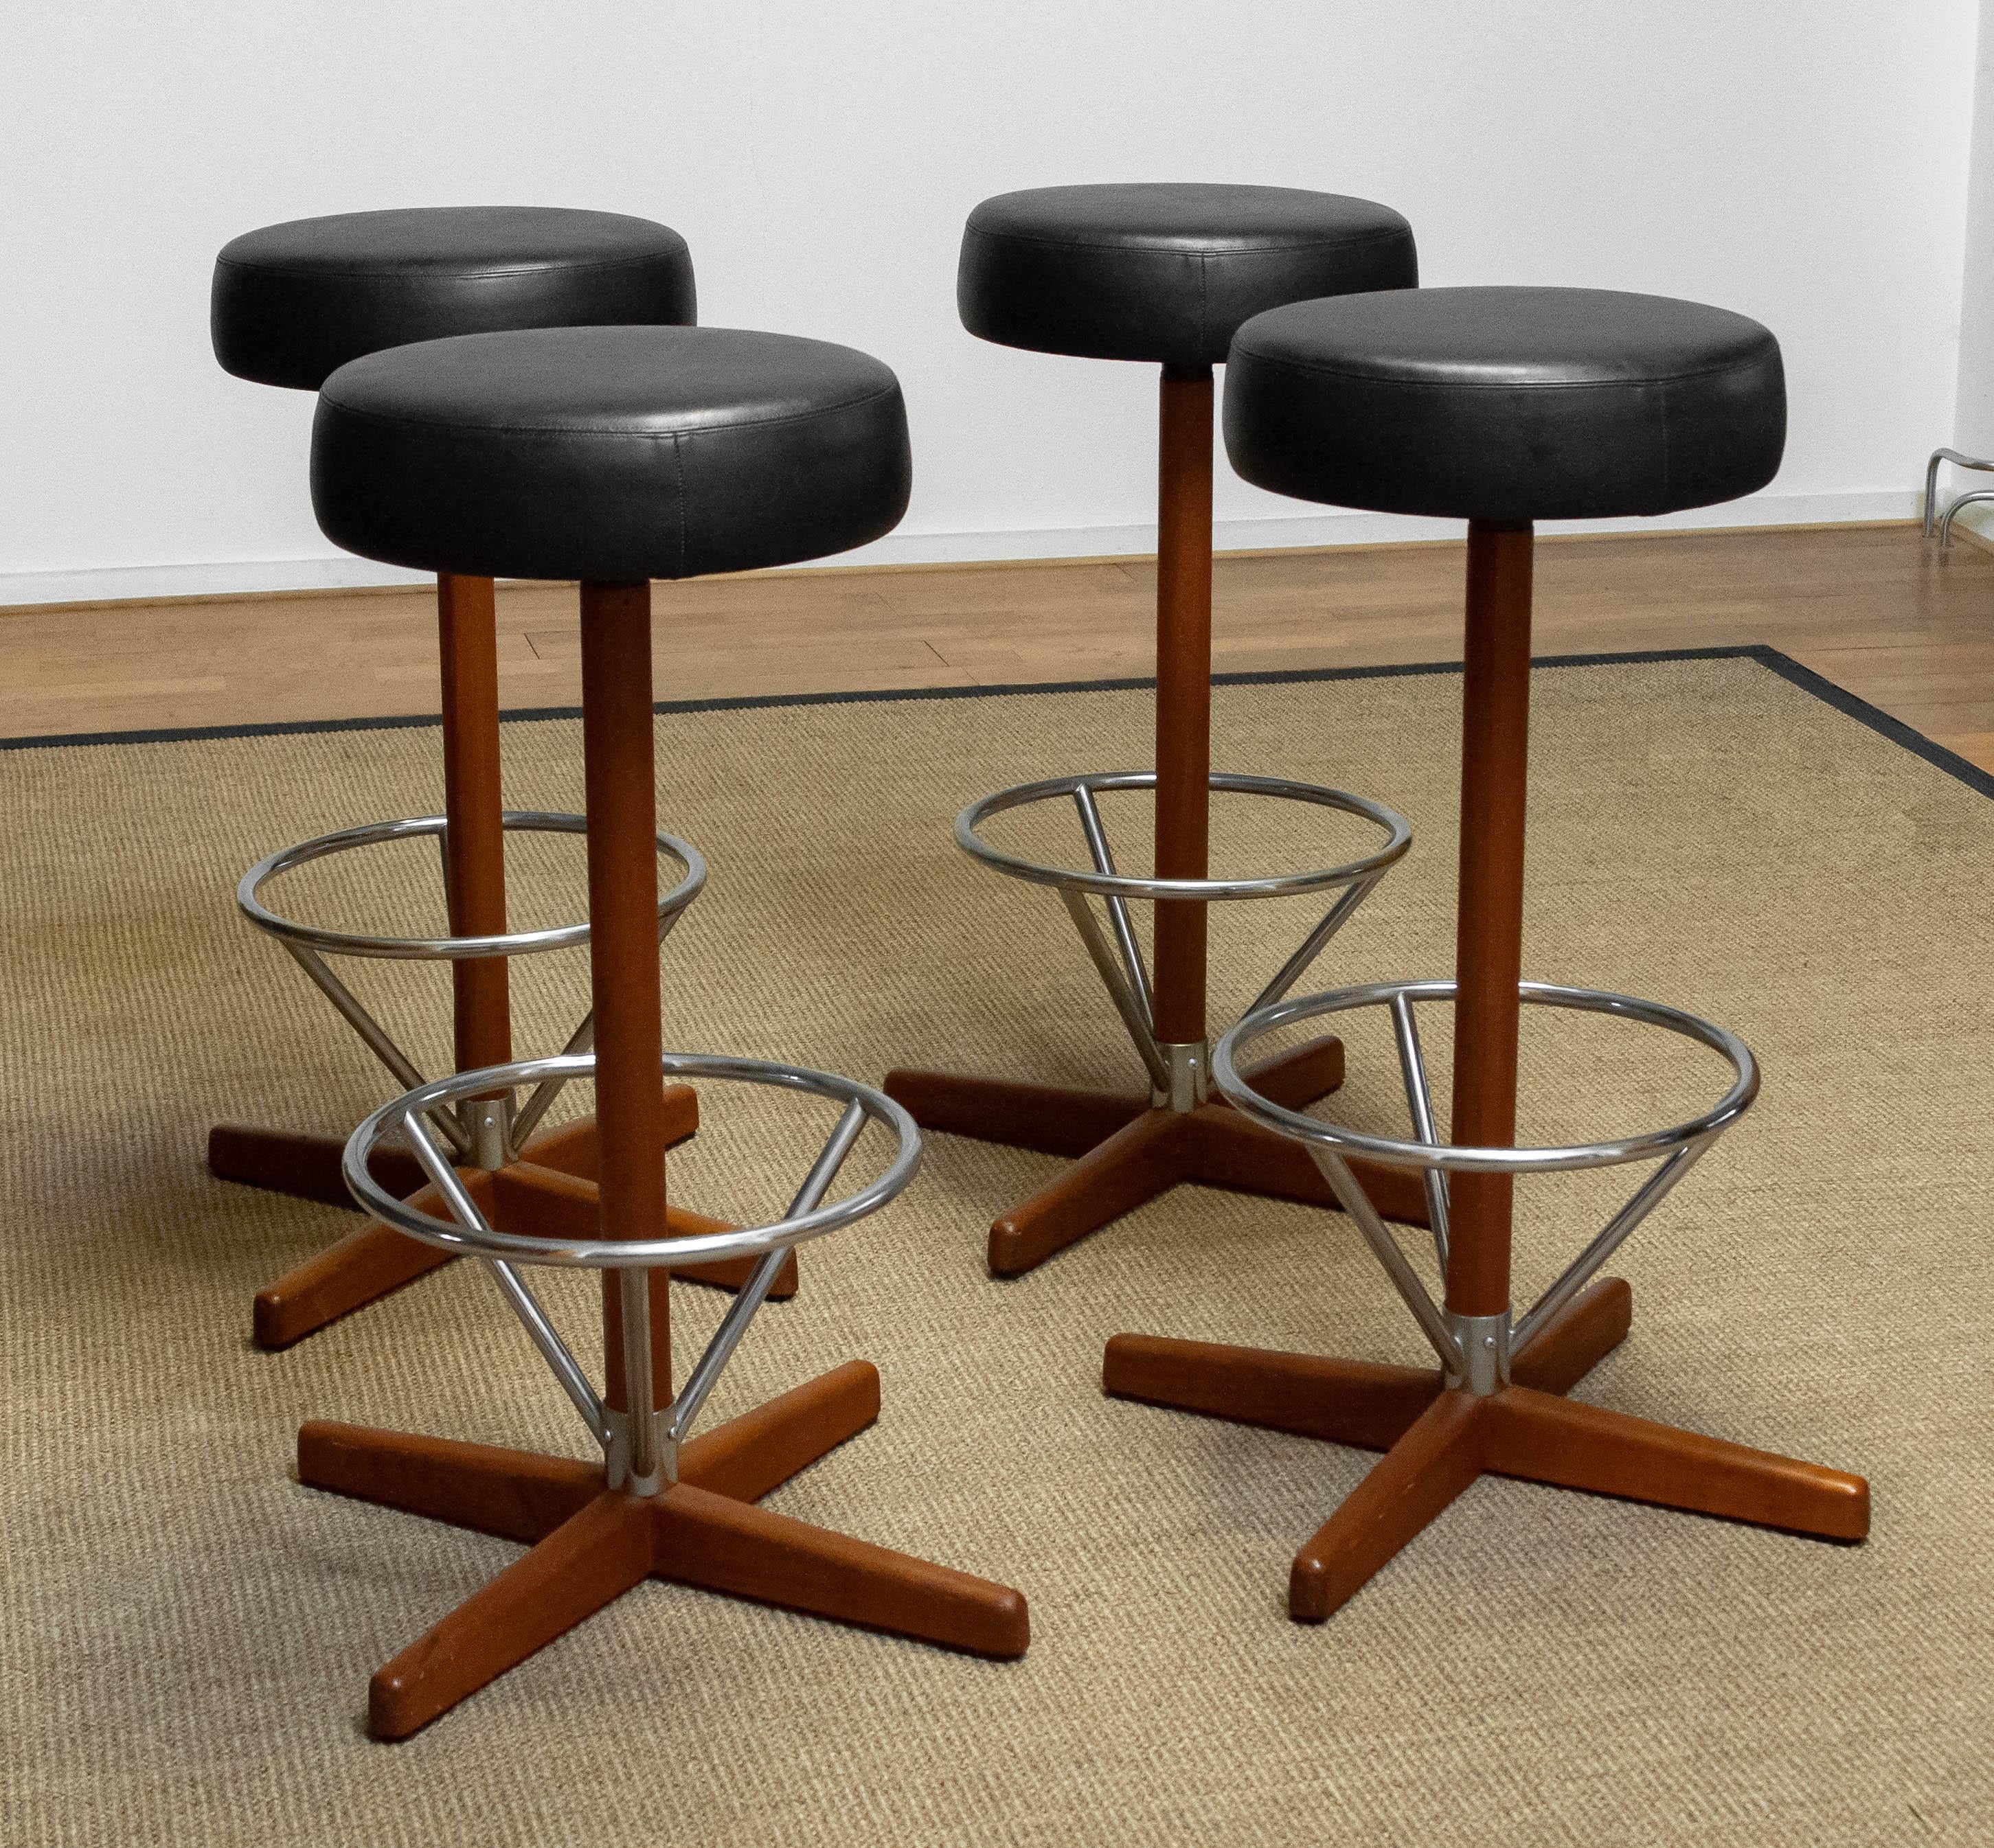 Beautiful group of four teak and chrome swivel bar stools designed by Börje Johanson for Johanson Design upholstered with black faux leather.
All four stools are in good condition.